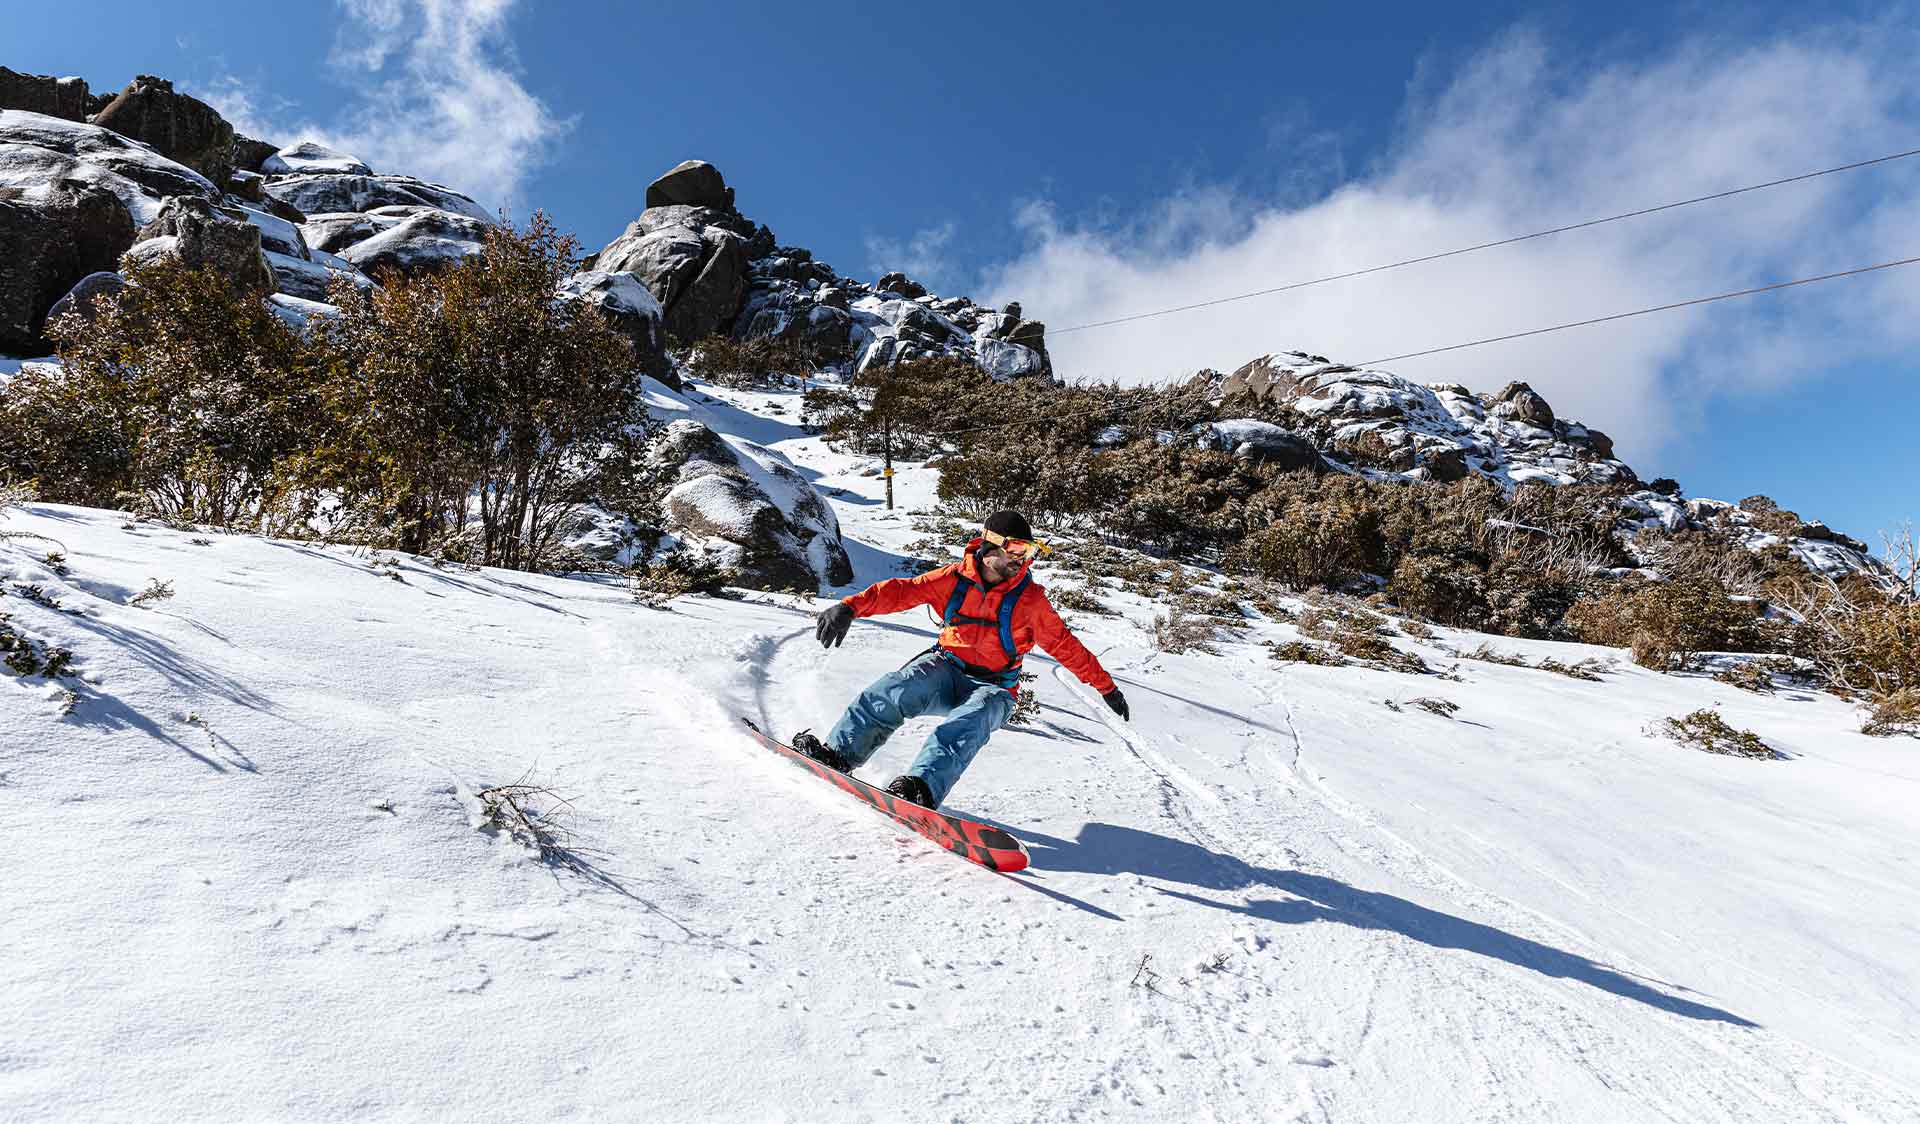 A snowboarder rides the advanced terrain in Cresta Valley at Mount Buffalo